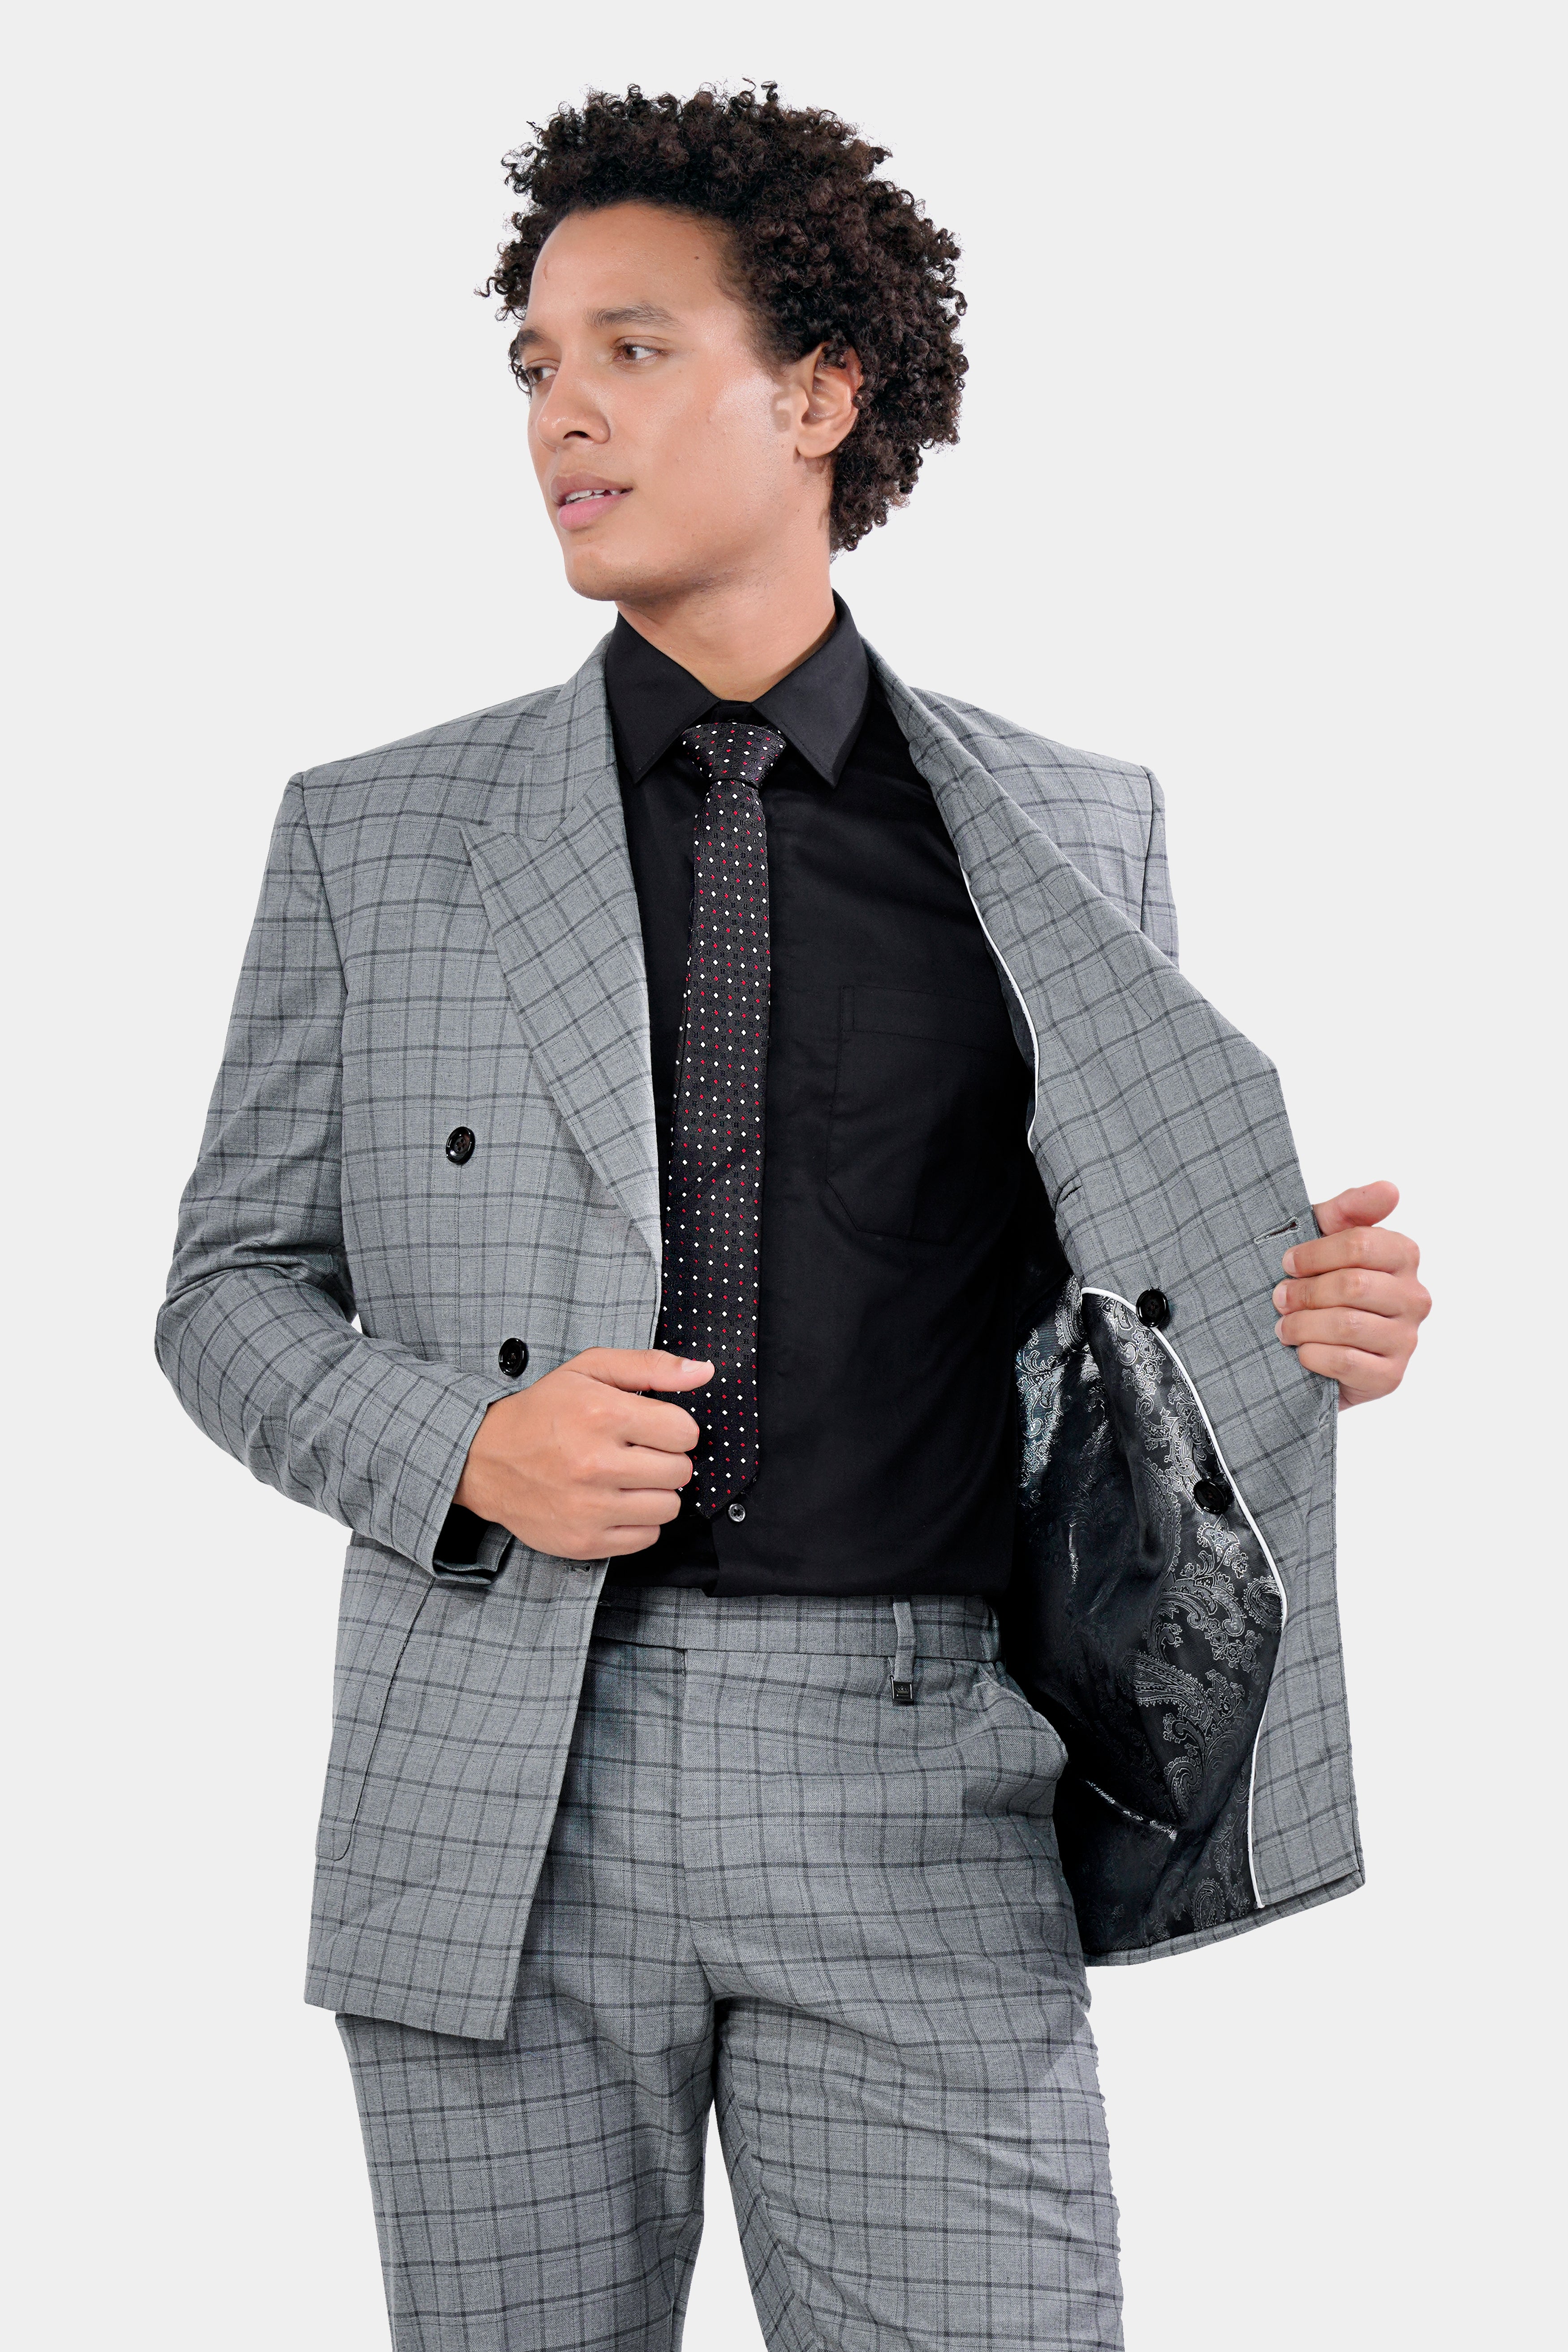 Boulder Gray Checkered Wool Rich Double Breasted Blazer BL2930-DB-PP-36, BL2930-DB-PP-38, BL2930-DB-PP-40, BL2930-DB-PP-42, BL2930-DB-PP-44, BL2930-DB-PP-46, BL2930-DB-PP-48, BL2930-DB-PP-50, BL2930-DB-PP-52, BL2930-DB-PP-54, BL2930-DB-PP-56, BL2930-DB-PP-58, BL2930-DB-PP-60